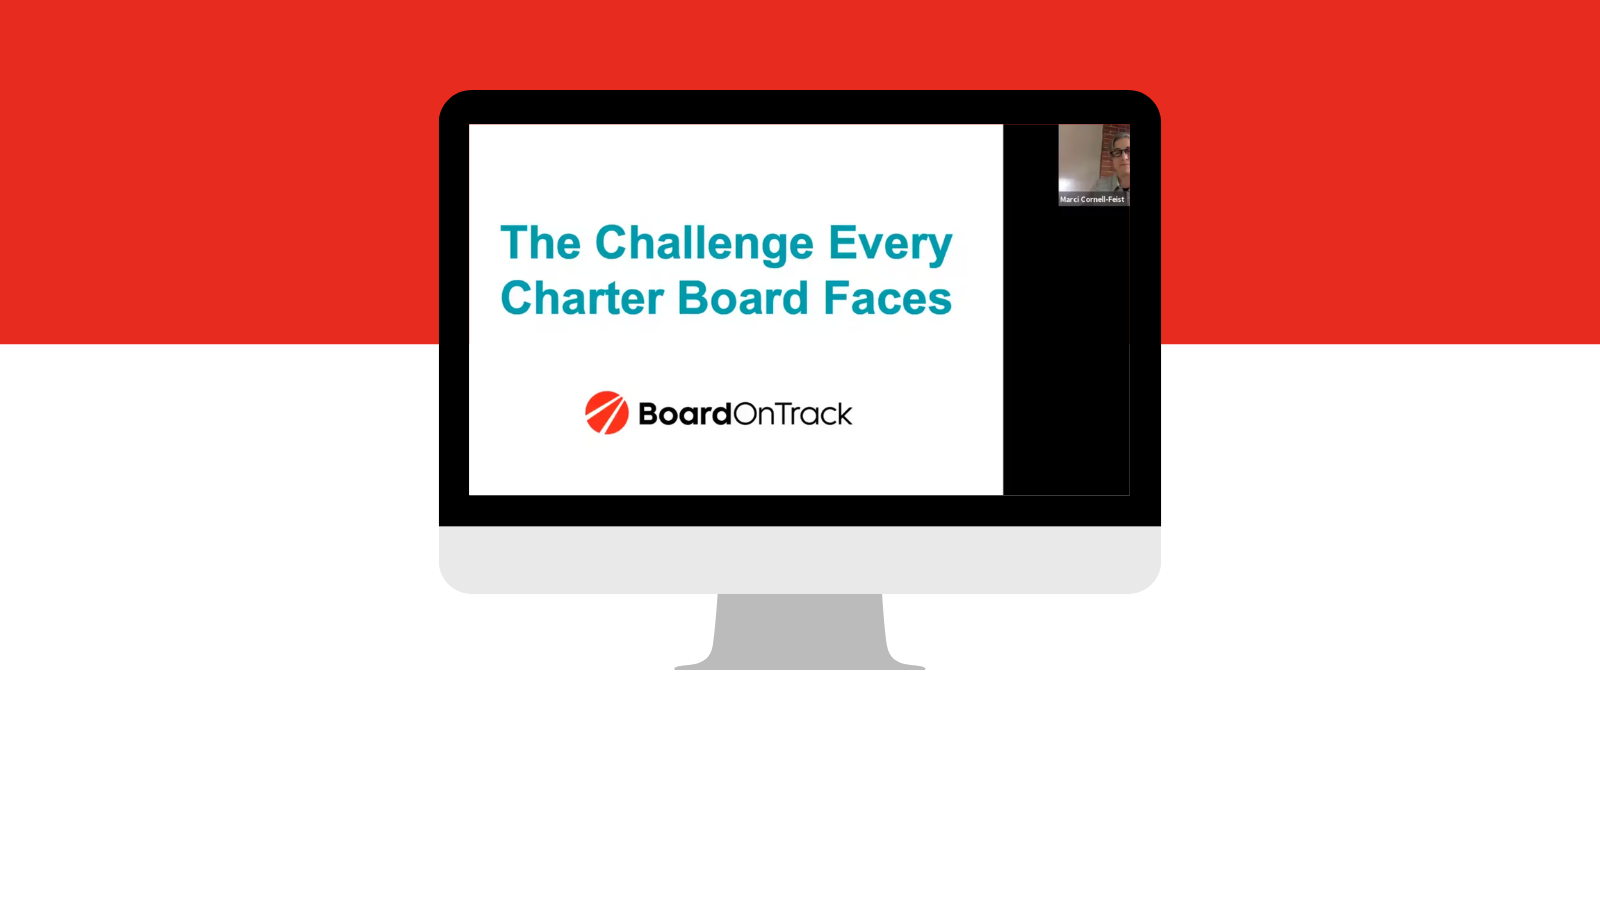 The Challenge Every Charter Board Faces